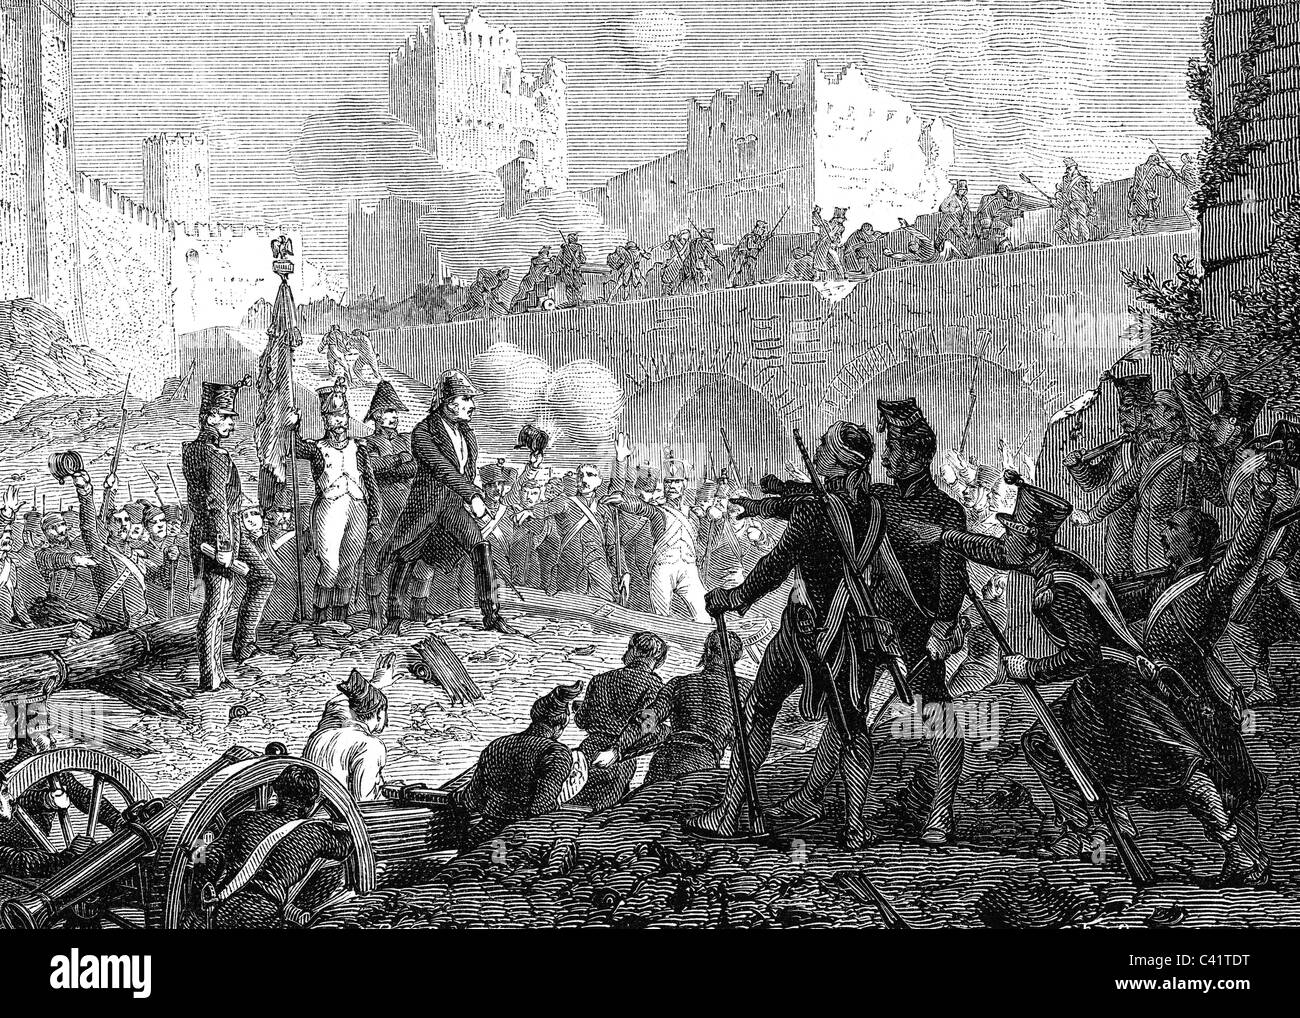 events, Peninsula War 1808 - 1812, Siege of Badajoz 16.3. - 6.4.1812, surrender of the French garrison, wood engraving, 19th century, general Armand Philippon, soldiers, city, spain, Napoleonic Wars, France, historic, historical, people, Additional-Rights-Clearences-Not Available Stock Photo